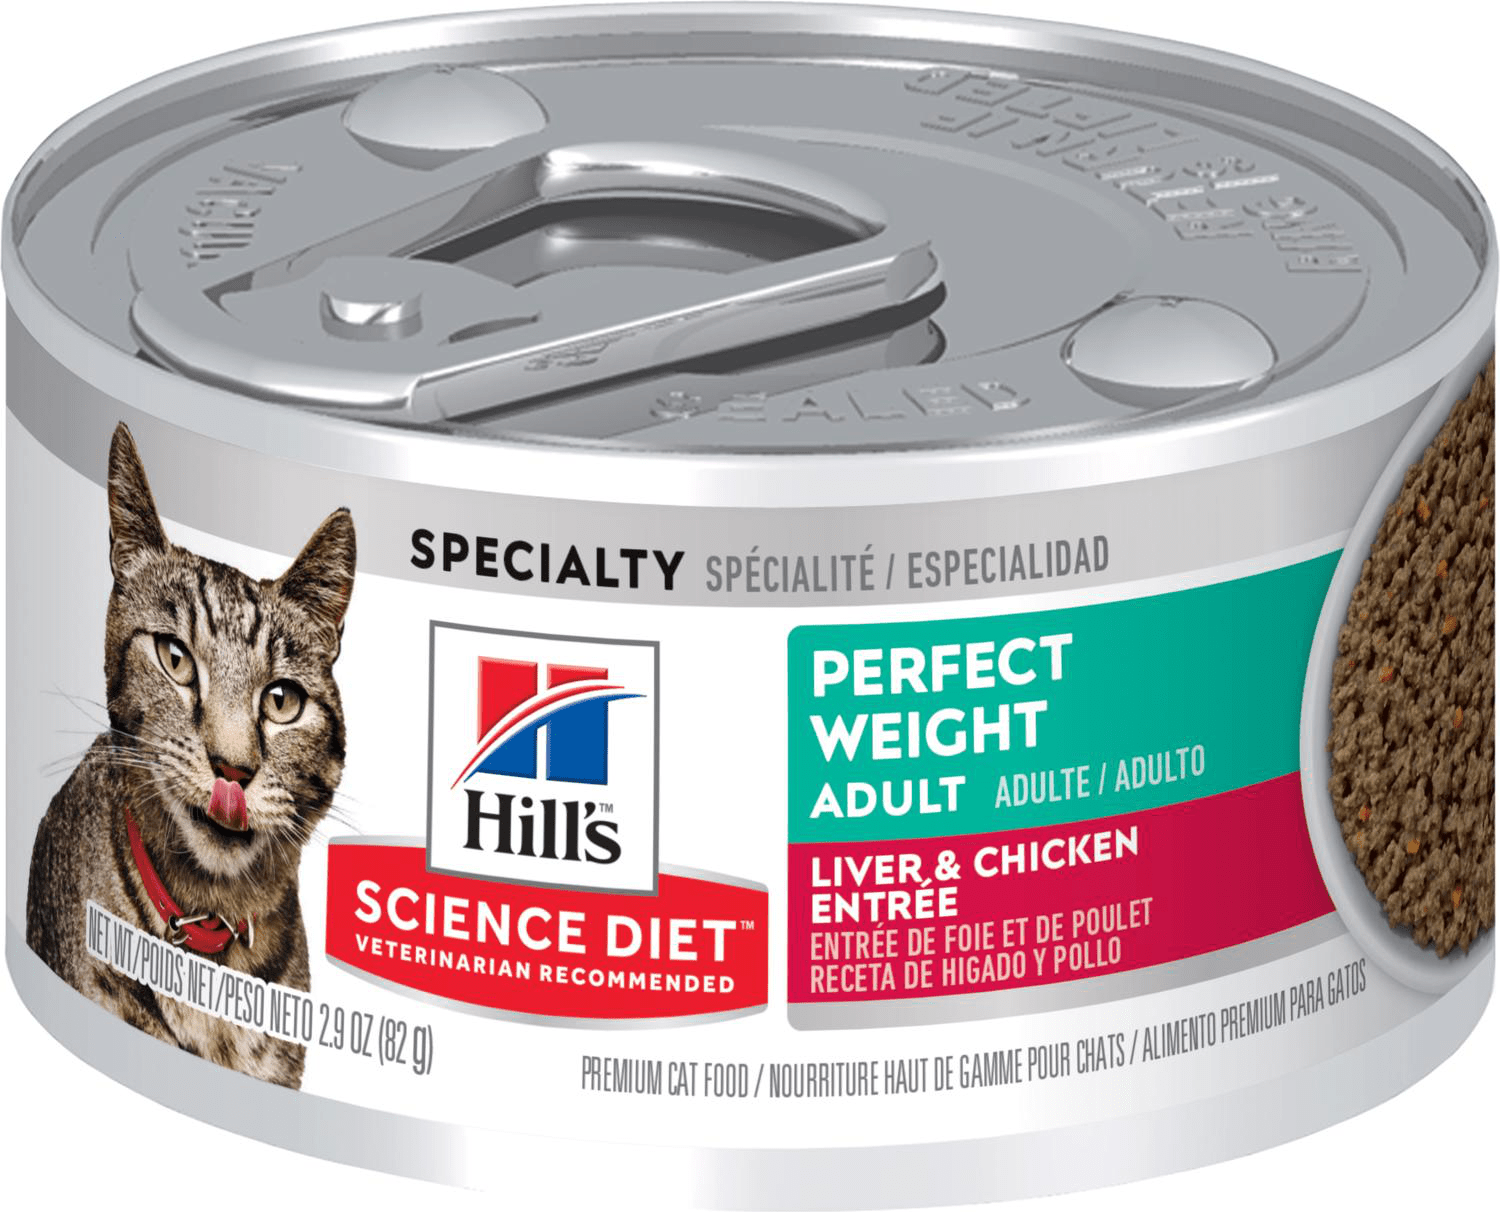 Hill's Science Diet Adult Perfect Weight Liver & Chicken Entrée